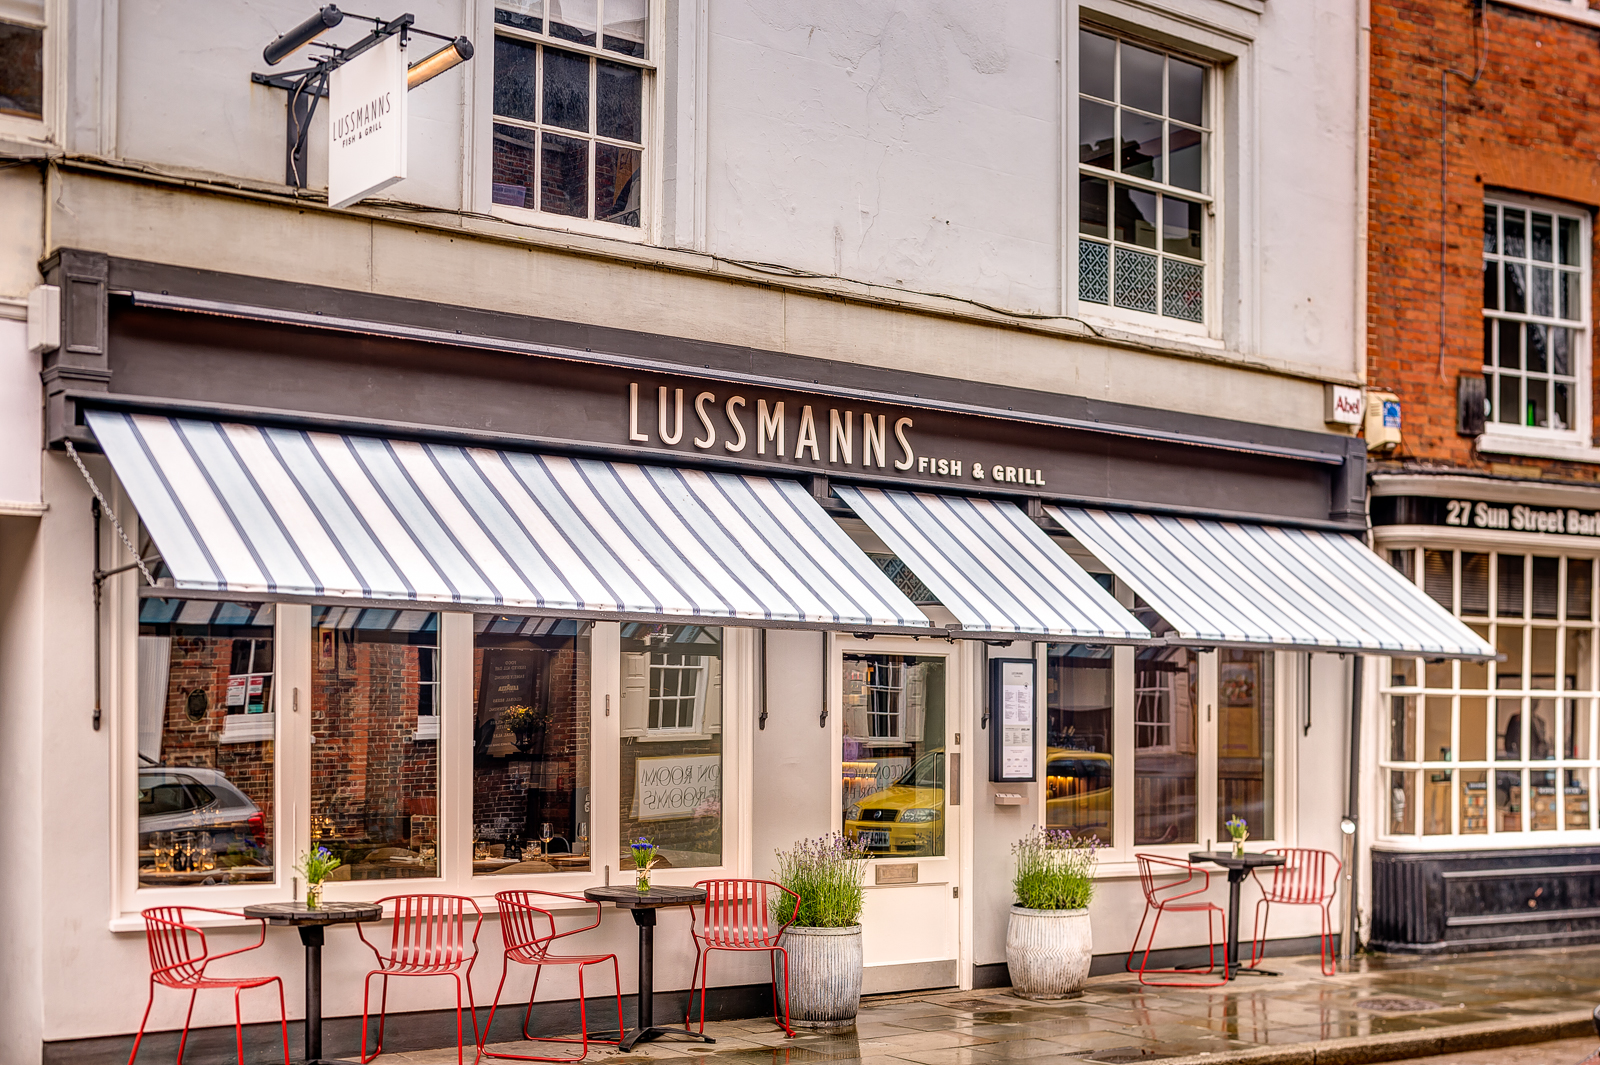 Local restaurant Lussmanns delivers more than 25,000 orders of food during lockdown.